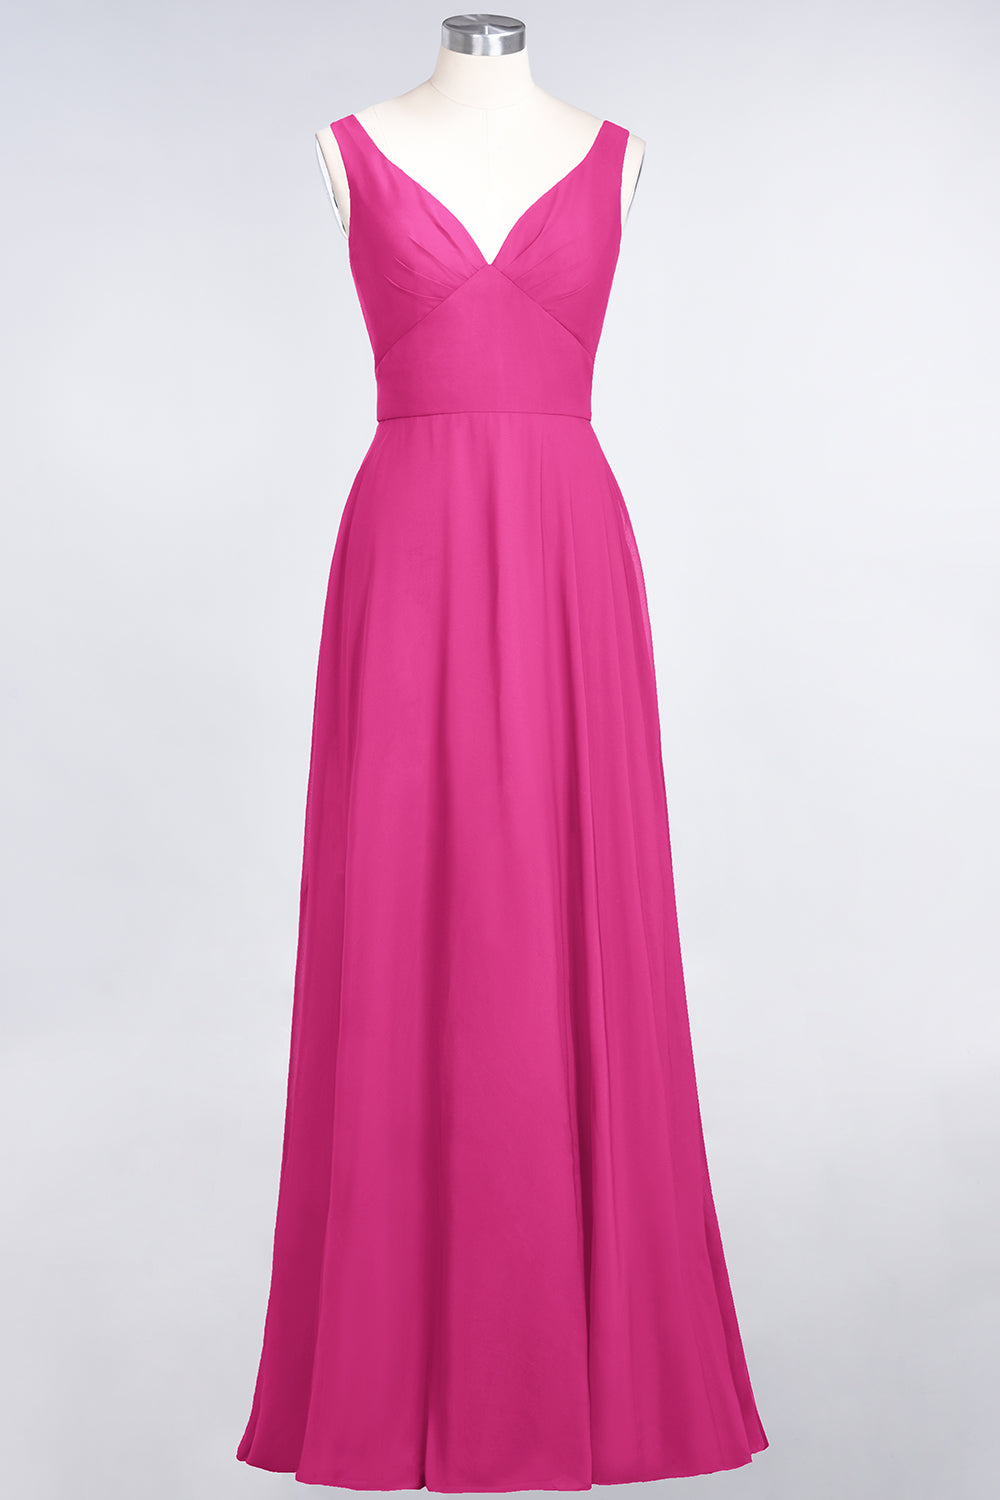 Chic Chiffon V-Neck Straps Ruffle Affordable Bridesmaid Dresses with Open Back